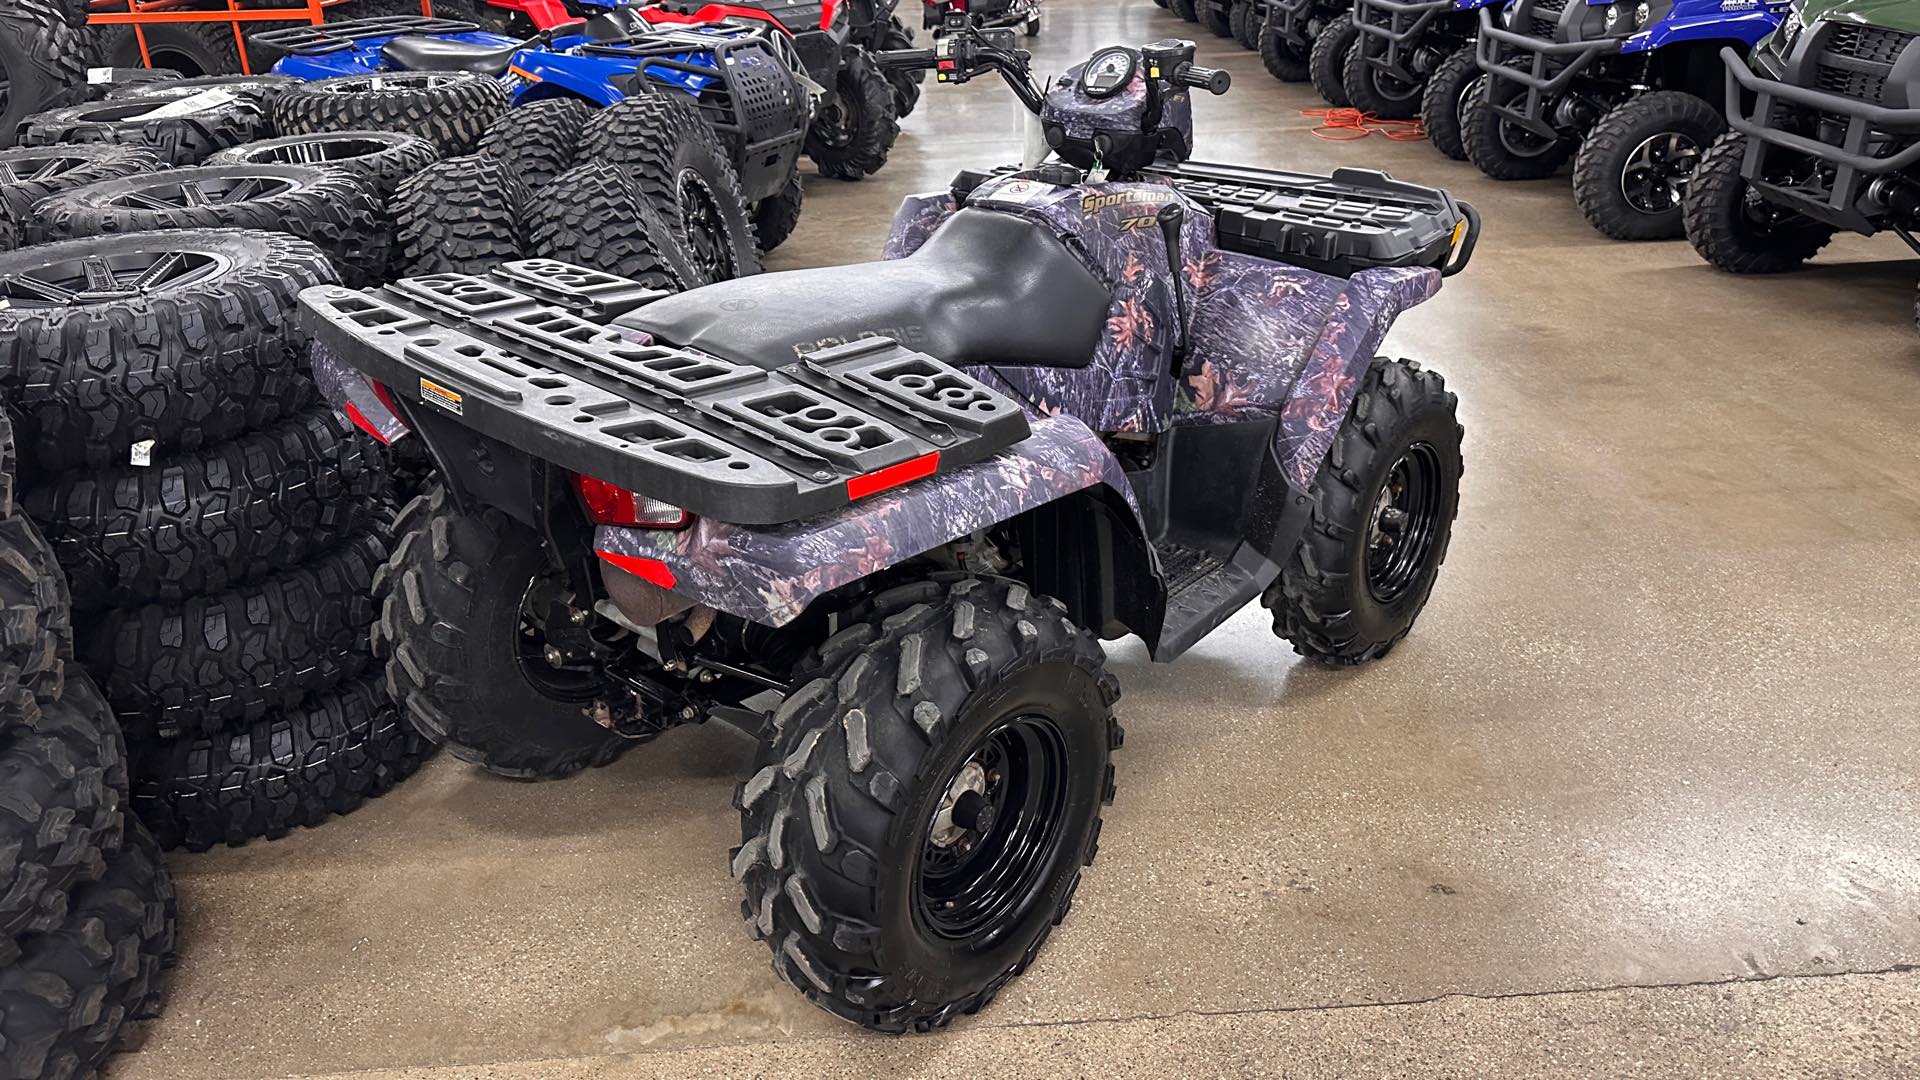 2006 Polaris Sportsman 700 Twin at ATVs and More